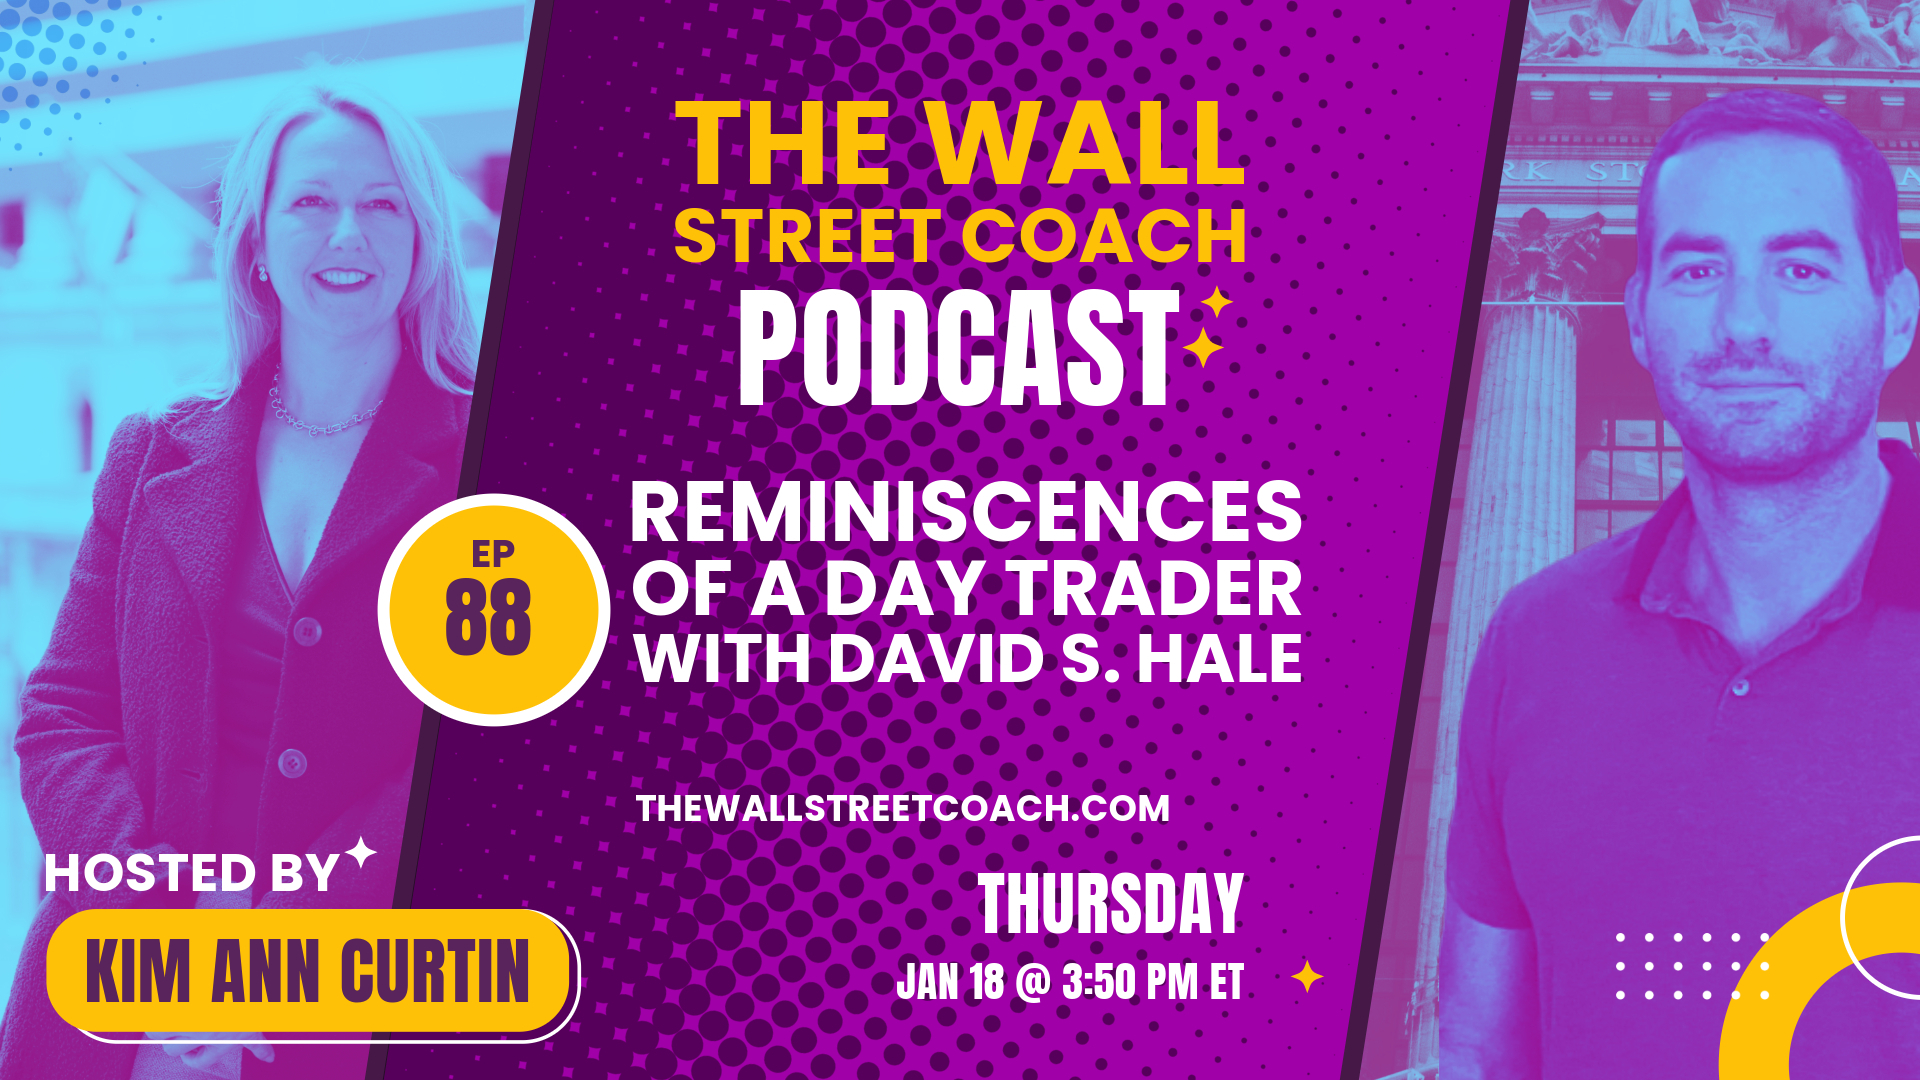 Ep 88: Reminiscences of a Day Trader with David S. Hale